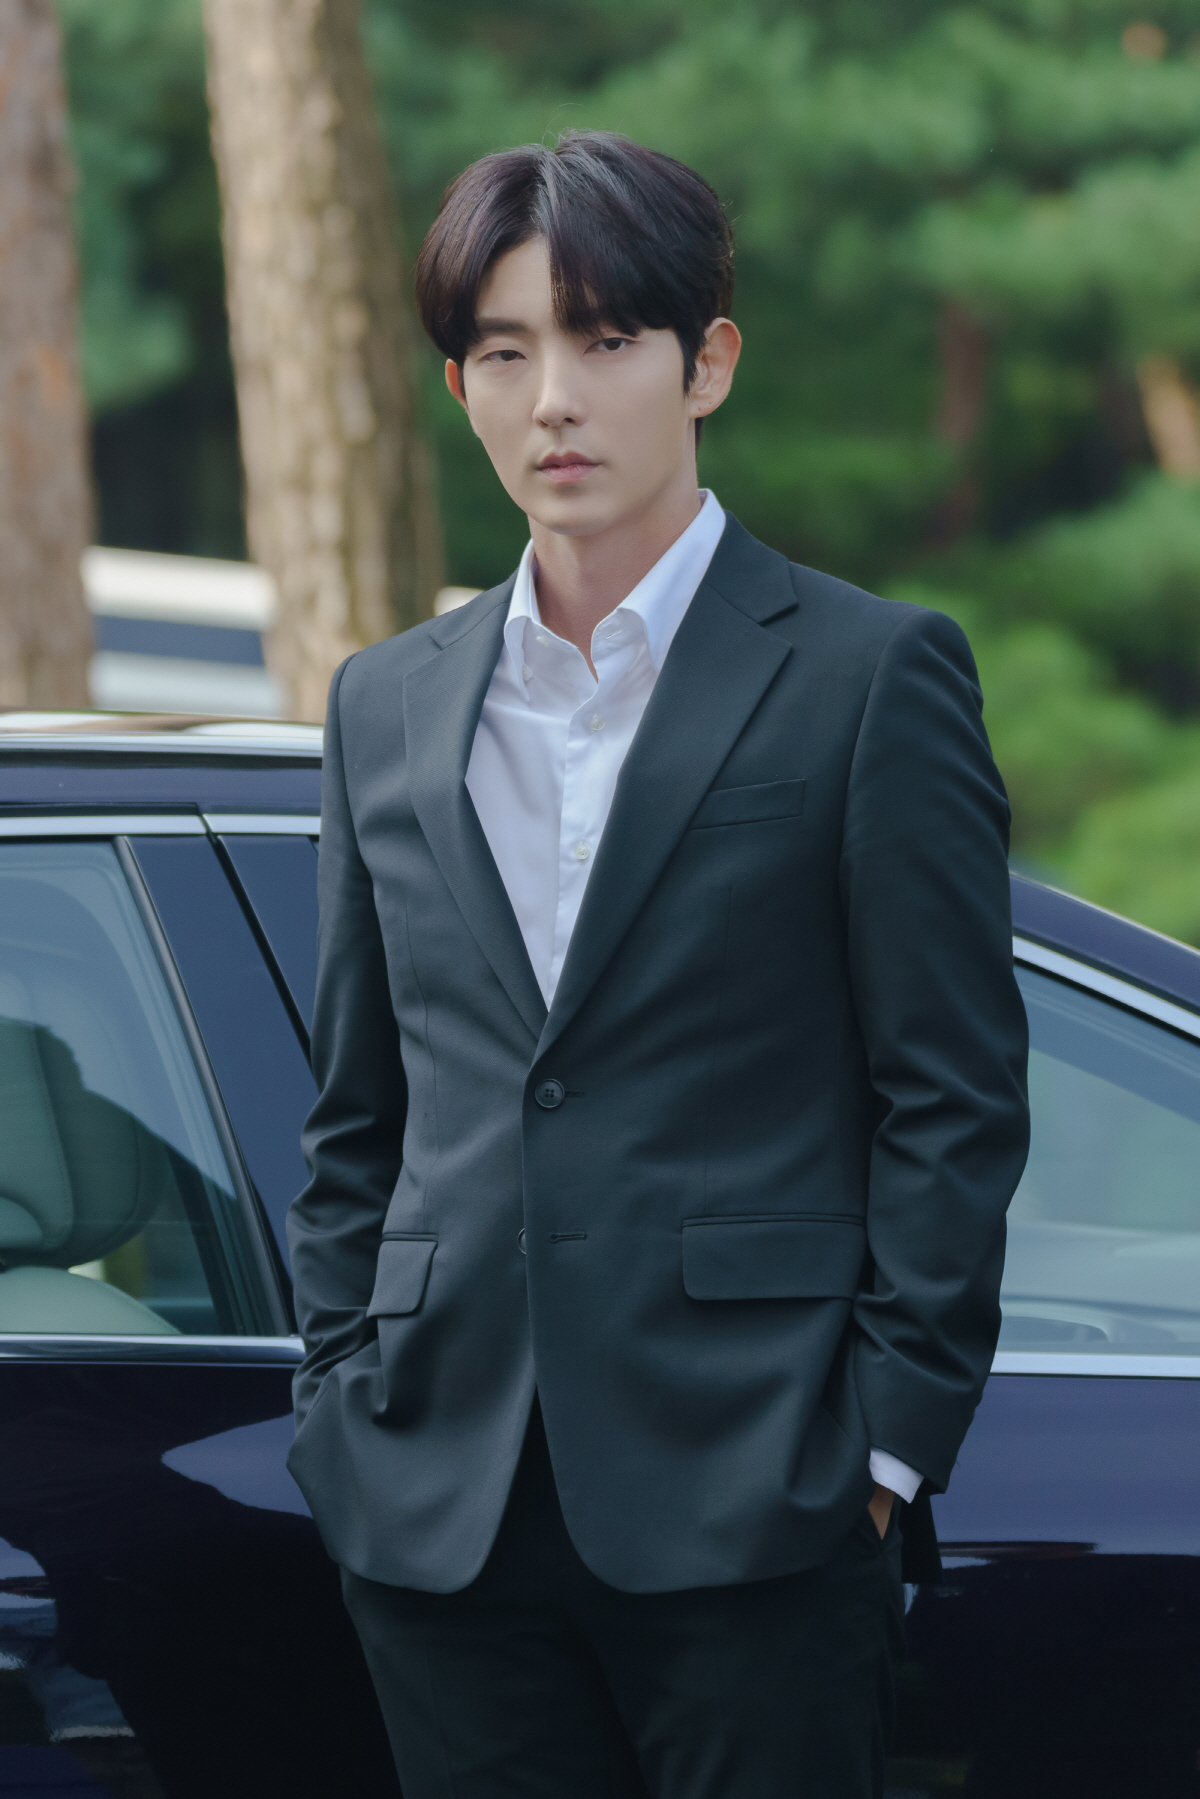 Actor Lee Joon-gi, 39, re-emerged his desire for melo-acting with Moon Chae-won.Lee Joon-gis first life film, which first entered the entertainment industry as an advertising model for the clothing brand in 2001, is Lee Joon-gis film The Kings Man (2005), which is so famous that it is unconcerned.Lee Joon-gi, who was cast as a clown in the 1000 to 1 competition, also hit a home run with My Girl, a drama that was broadcast at the same time, and became popular as a beautiful man than a woman.Lee Joon-gi, who has been on the path of Top Star since then, received attention as a film Gorgeous Holiday in 2007 and applauded viewers for leaving a masterpiece of the noir drama Dog and Wolf Time.Since then, he has also shown Iljimae (2008), Arang Satojeon (2012), Towix (2013), Chosun Gunman (2014), Sunbee Walking Through the Night (2015), Lovers of the Moon - Bobo Senseirye (2016), Criminal Mind (2017), and Unlawful Lawyer (2018).The TVN drama The Flower of Evil (played by Yoo Jung-hee and directed by Kim Chul-gyu) on the 23rd is another life work by Lee Joon-gi, which connects The Kings Man and The Time of Dogs and Wolves.Flower of Evil is a man who even Acted Love and a wife who started to doubt his reality.Lee Joon-gi showed the emotional act that met the water by Acting the man who lived the life of Baek Hee-sung in the drama Flower of Evil which is a drama of the high-density emotional tracing of two people facing the truth that I want to ignore.In particular, Flower of Evil was praised as Yongdu Yongmi Drama as a perfect finish until the end, and after starting with the early 3% audience rating, it rose vertically to 5.7% (Nilson Korea, nationwide standard for paid households).Lee Joon-gi conducted End Interview on the 28th and in writing.Lee Joon-gi and Moon Chae-won made The Slap about three years after the TVN Criminal Mind, which was broadcast in 2017.Their Slap would have been somewhat burdensome at the time because Criminal Mind did not perform well at the time. Lee Joon-gi thought of The Slap with Moon Chae-won and said, When I first read the script of Flower of Evil, the idea was This work is not something I can handle now.He constantly asked himself whether the current Actor Lee Joon-gi is right to capture a husband who loves his daughter, a husband who only looks at his wife, and a sad and brutal past hidden behind all of them.I had so many troubles, such as Can I persuade the public and Will the color of Actor Lee Joon-gi be strongly buried and collapse the overall balance until I chose the work. Fortunately, I had about two weeks of time, and I continued to read the script and draw pictures in my head.Then I suddenly thought, Is not all this the same thing as the fate that came to me now?It seems that I have a desire to make this work a turning point in Actor life.Before we went to work with Moon Chae-won, we seemed to have made the decision to appear in the work by sharing stories such as If we make this work well, we can draw a new genre called Suspense Melor as our own unique and unique feeling.Lee Joon-gi is familiar with the wishes of viewers who are sorry for their melodrama with Moon Chae-won; he says, The power of the melodrama that Mr. Moon Chae-won has is different.There are times when I am really lovely, but I am sad and sad.So, I was expecting the amount of Acting to be drawn together, and I had an Acting desire to try Chae Won and melodrama from before.Thankfully, I was able to make a melody together through this work, but I am sorry that I would have taken more small and happy daily life like when I was in love.But the melodrama that we made together was so satisfying, I think it was an Acting sum that filled each other, he said.Lee Joon-gi also talked about Moon Chae-won, saying, In the case of Moon Chae-won Actor, I met a few times before I was worried about the work of Flower of Evil and talked about my life.Even when I had a lot of trouble before deciding Flower of Evil, I was able to get confidence because Chae Won told me that My brother is a character who can make it attractive enough.Actor Moon Chae-won in the field is delicate and highly focused, and is an Actor who worries until he can interpret his feelings.So when I was aligning the Acting, I was more stimulated and helped by the emotional part, and because I had a car support, I could feel the feelings of Do Hyun-soo more desperately.It was probably hard to express the feelings of the car support in this work because it is an actor who makes the immersion of the drama well.I had a lot of hardships, and I have to buy something delicious next time and restore my energy. Seo Hyun-woo said, I was hearing rumors that I was enthusiastic about Acting.I remember waiting for my first meeting with half-anxiety because I thought that people around me should be nervous before the start.But when I actually met, I was so good, and I was a friend who was sincere and above all as an actor.In addition, the part where I enjoy the scene is similar to me, so I was able to create a variety of scenes by sharing many opinions when shooting.Especially, it was a friend who helped me to make Do Hyun-soos character in the early days, and I was so grateful that I became a good colleague to meet with other works often.And I am an actor who likes me more because I am in charge of the actors. Jang Hee-jin, who appeared as his sister Do Hae-su, is also a grateful person to Lee Joon-gi.Lee Joon-gi said, I am a second artist, who has a very bright energy. He is very careful about the people around him.Actor is a deep and focused actor who draws as an actor. When I heard that he was personally involved in this work, he was very relieved.In the field, I play with me well and play fun, but when I play, I concentrate quickly and show new emotional details.Every time I did that, I admired the aerodynamics of the actor Jang Hee-jin and called it Jang Pro.It is a friend who made the scene more enjoyable as a good brother and colleague. Director Kim Chul-gyu and writer Yoo Jung-hee also created the Flower of Evil. Lee Joon-gi said, The director is the most grateful person in this work.He always presented a milestone on a long journey to write a character named Do Hyun-soo who believes in me and lives the life of Baek Hee-sung.It was a lot of help when I was Acting because I came with a lot of troubles made before coming to the shooting.I was able to rely on the director and concentrate on the work without any doubt. I think that these sincere and good staffs were together because they have a gentle and warm character.I think that the bishops strength was great in being able to complete the work without fail. If you make a few works and make a proposal, I want to continue working with the bishop. Lee Joon-gi also said, I met with him from the preparation period for the drama shooting and talked about various stories.It was very helpful to build a character because he was very enthusiastic about explaining the double line of each god or the feeling of the feeling.I felt a great affection for the work from the artist, so I wanted to repay it with a really good act.I sincerely thank the artist who trusted me entirely and allowed me to live a character called Do Hyun-soo.On the last day of shooting, he said, Thank you for drawing Do Hyun-soo so perfectly. I said, No, thank you for letting me live with Do Hyun-soo.Thats when my heart got hot, he said.Maybe it was called Yongdu Yongmi drama. After the drama end, actors have kept the long-term work of the work.Lee Joon-gi said, I watched the drama and talked about its very difficult.In fact, if you wanted to make it easy, you could somehow fill it with your know-how, but the flower of evil was not such a poor work.So, before entering the work, the actors met each other and talked about the character they thought and continued to share their appreciation of the work.And the most talked about after the shooting started was that the more you read, the more you think, the more you take, the more new emotions you continue to get and how you should convey the meaning.It is a work that all actors really had a lot of trouble expressing their own character.Even after the work is over, our chat room is saying, We have done this difficult work well, right? And I am so glad. Lee Joon-gi reviews his next film after finishing Flower of Evil